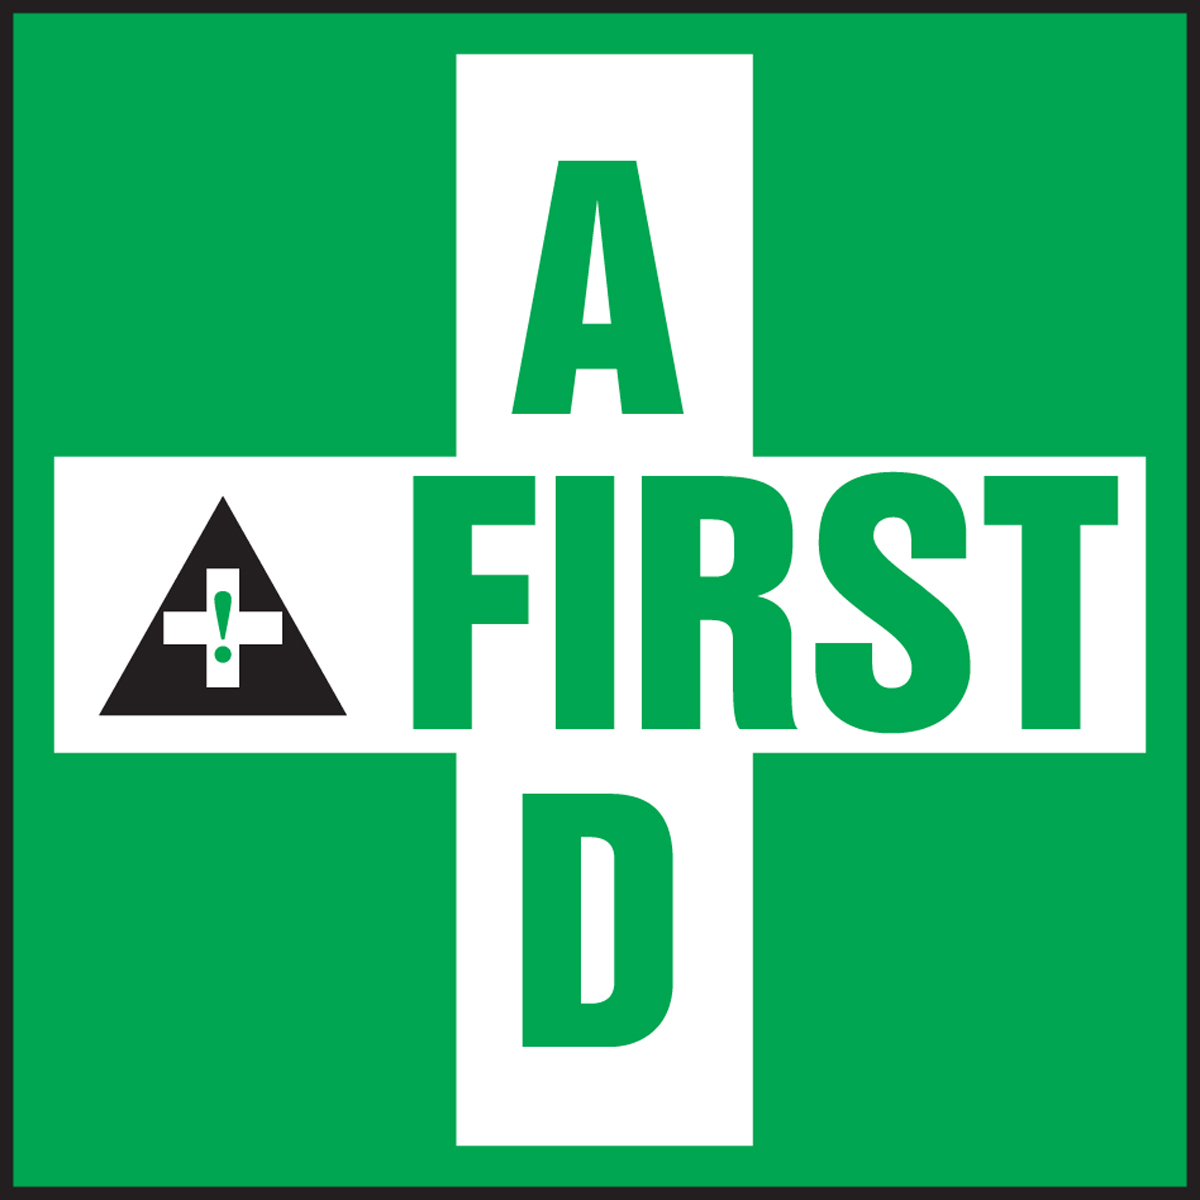 FIRST AID (W/GRAPHIC)